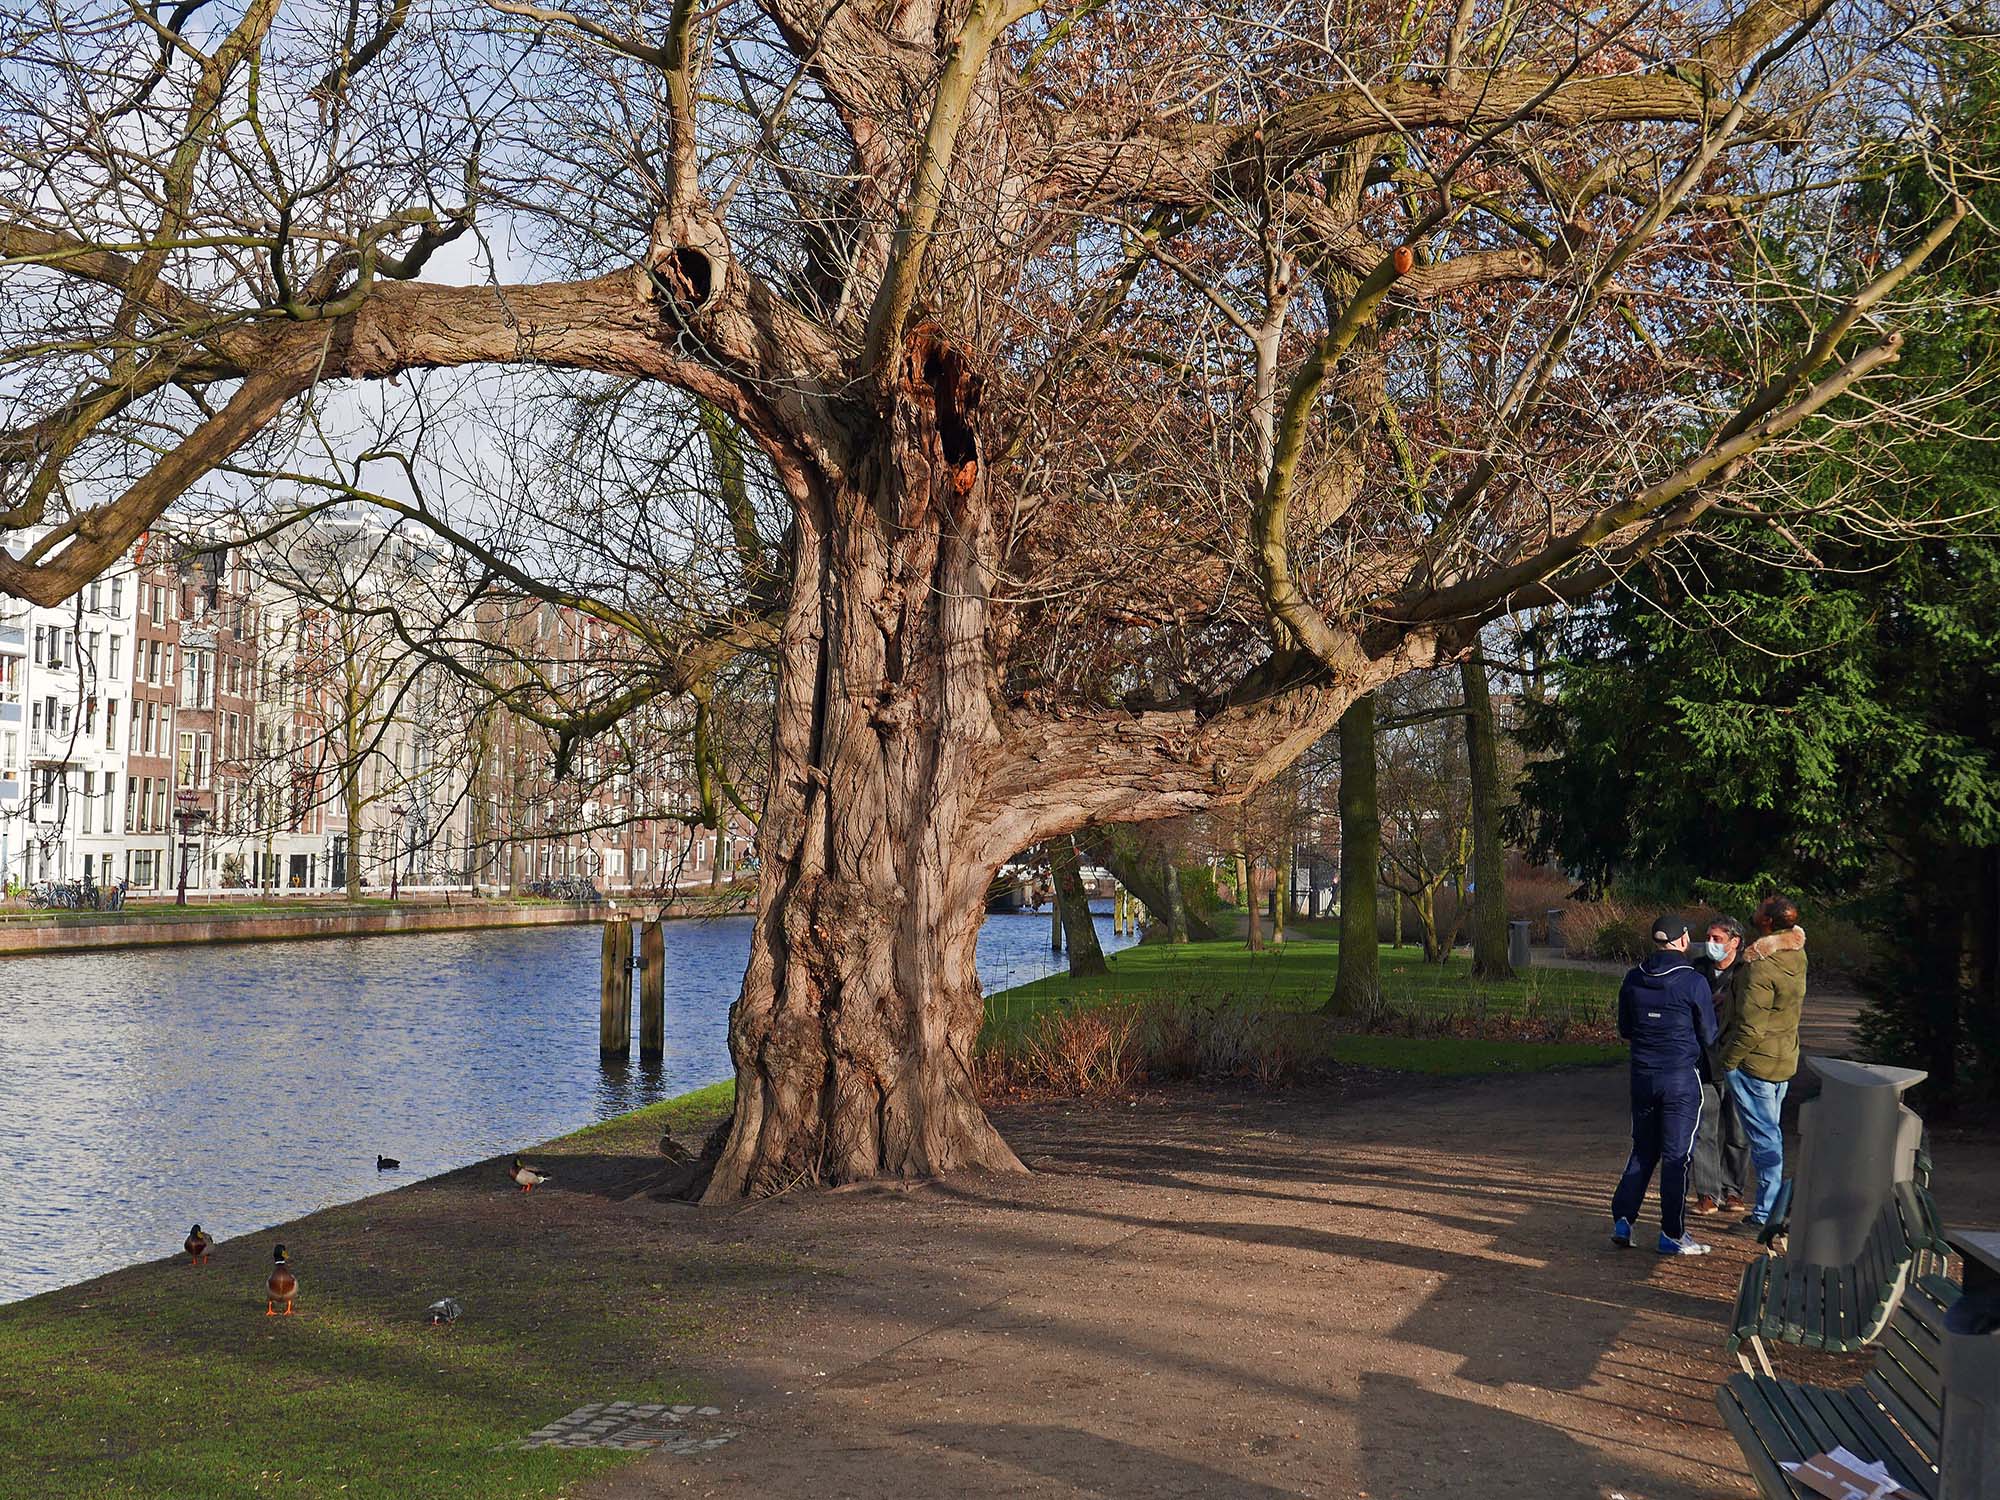 A large tree on the side of a canal with houses on the other side, and three people standing nearby